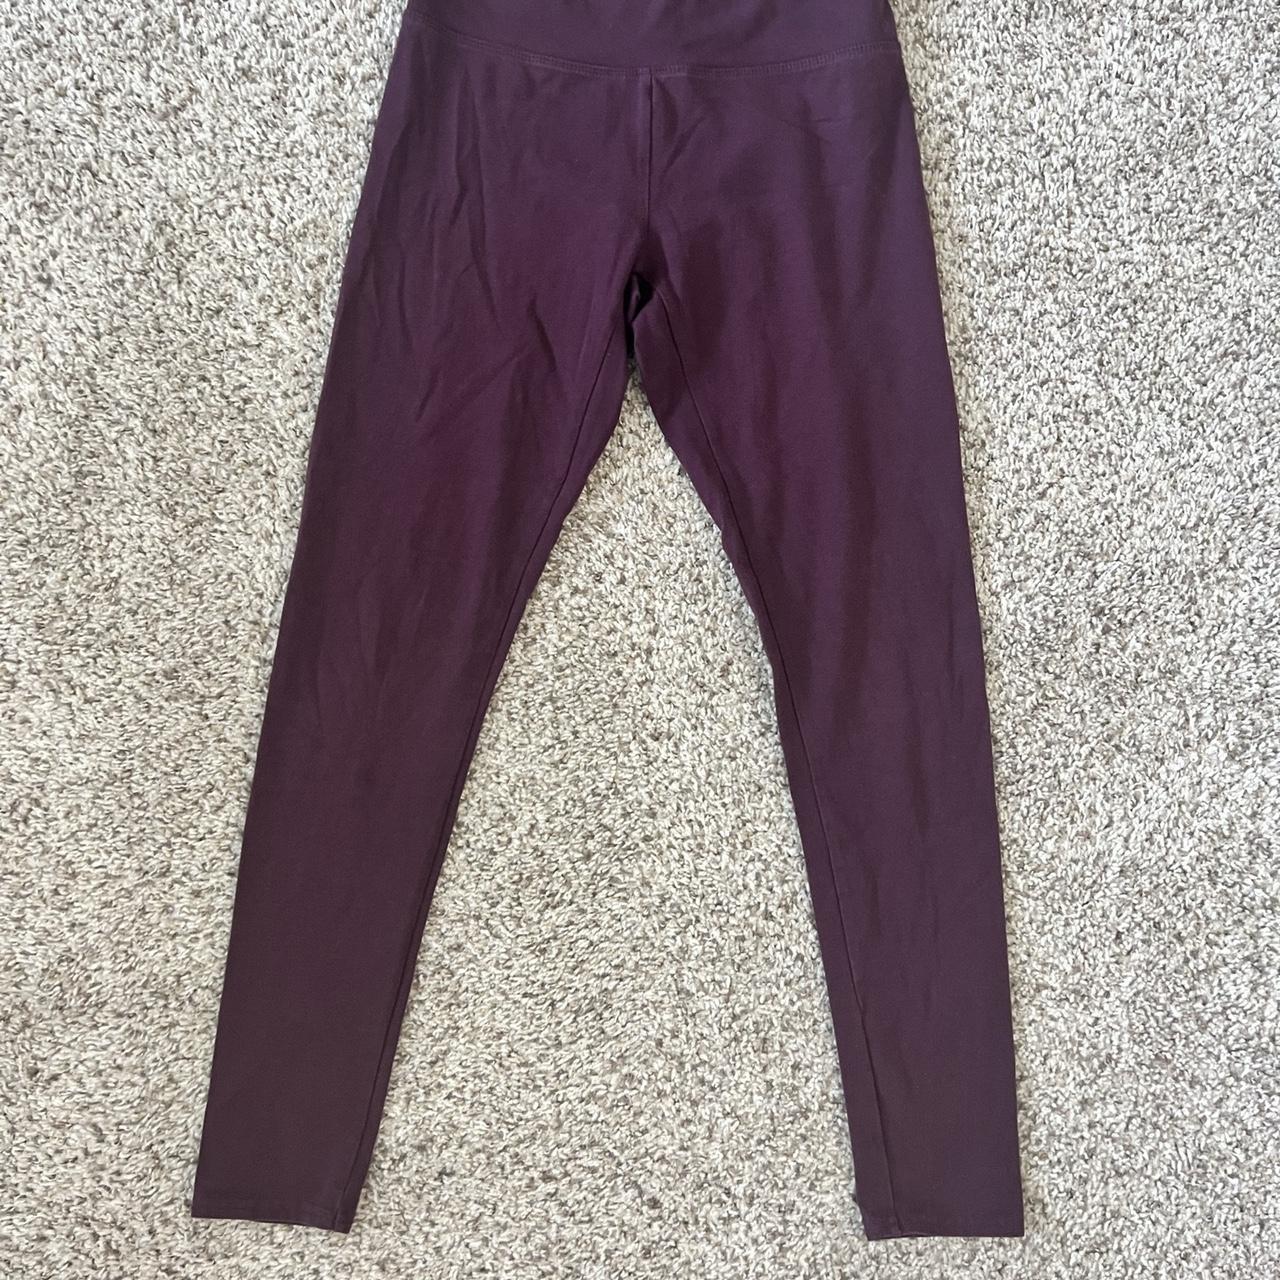 Aerie chill play move leggings in burgundy, size M. - Depop